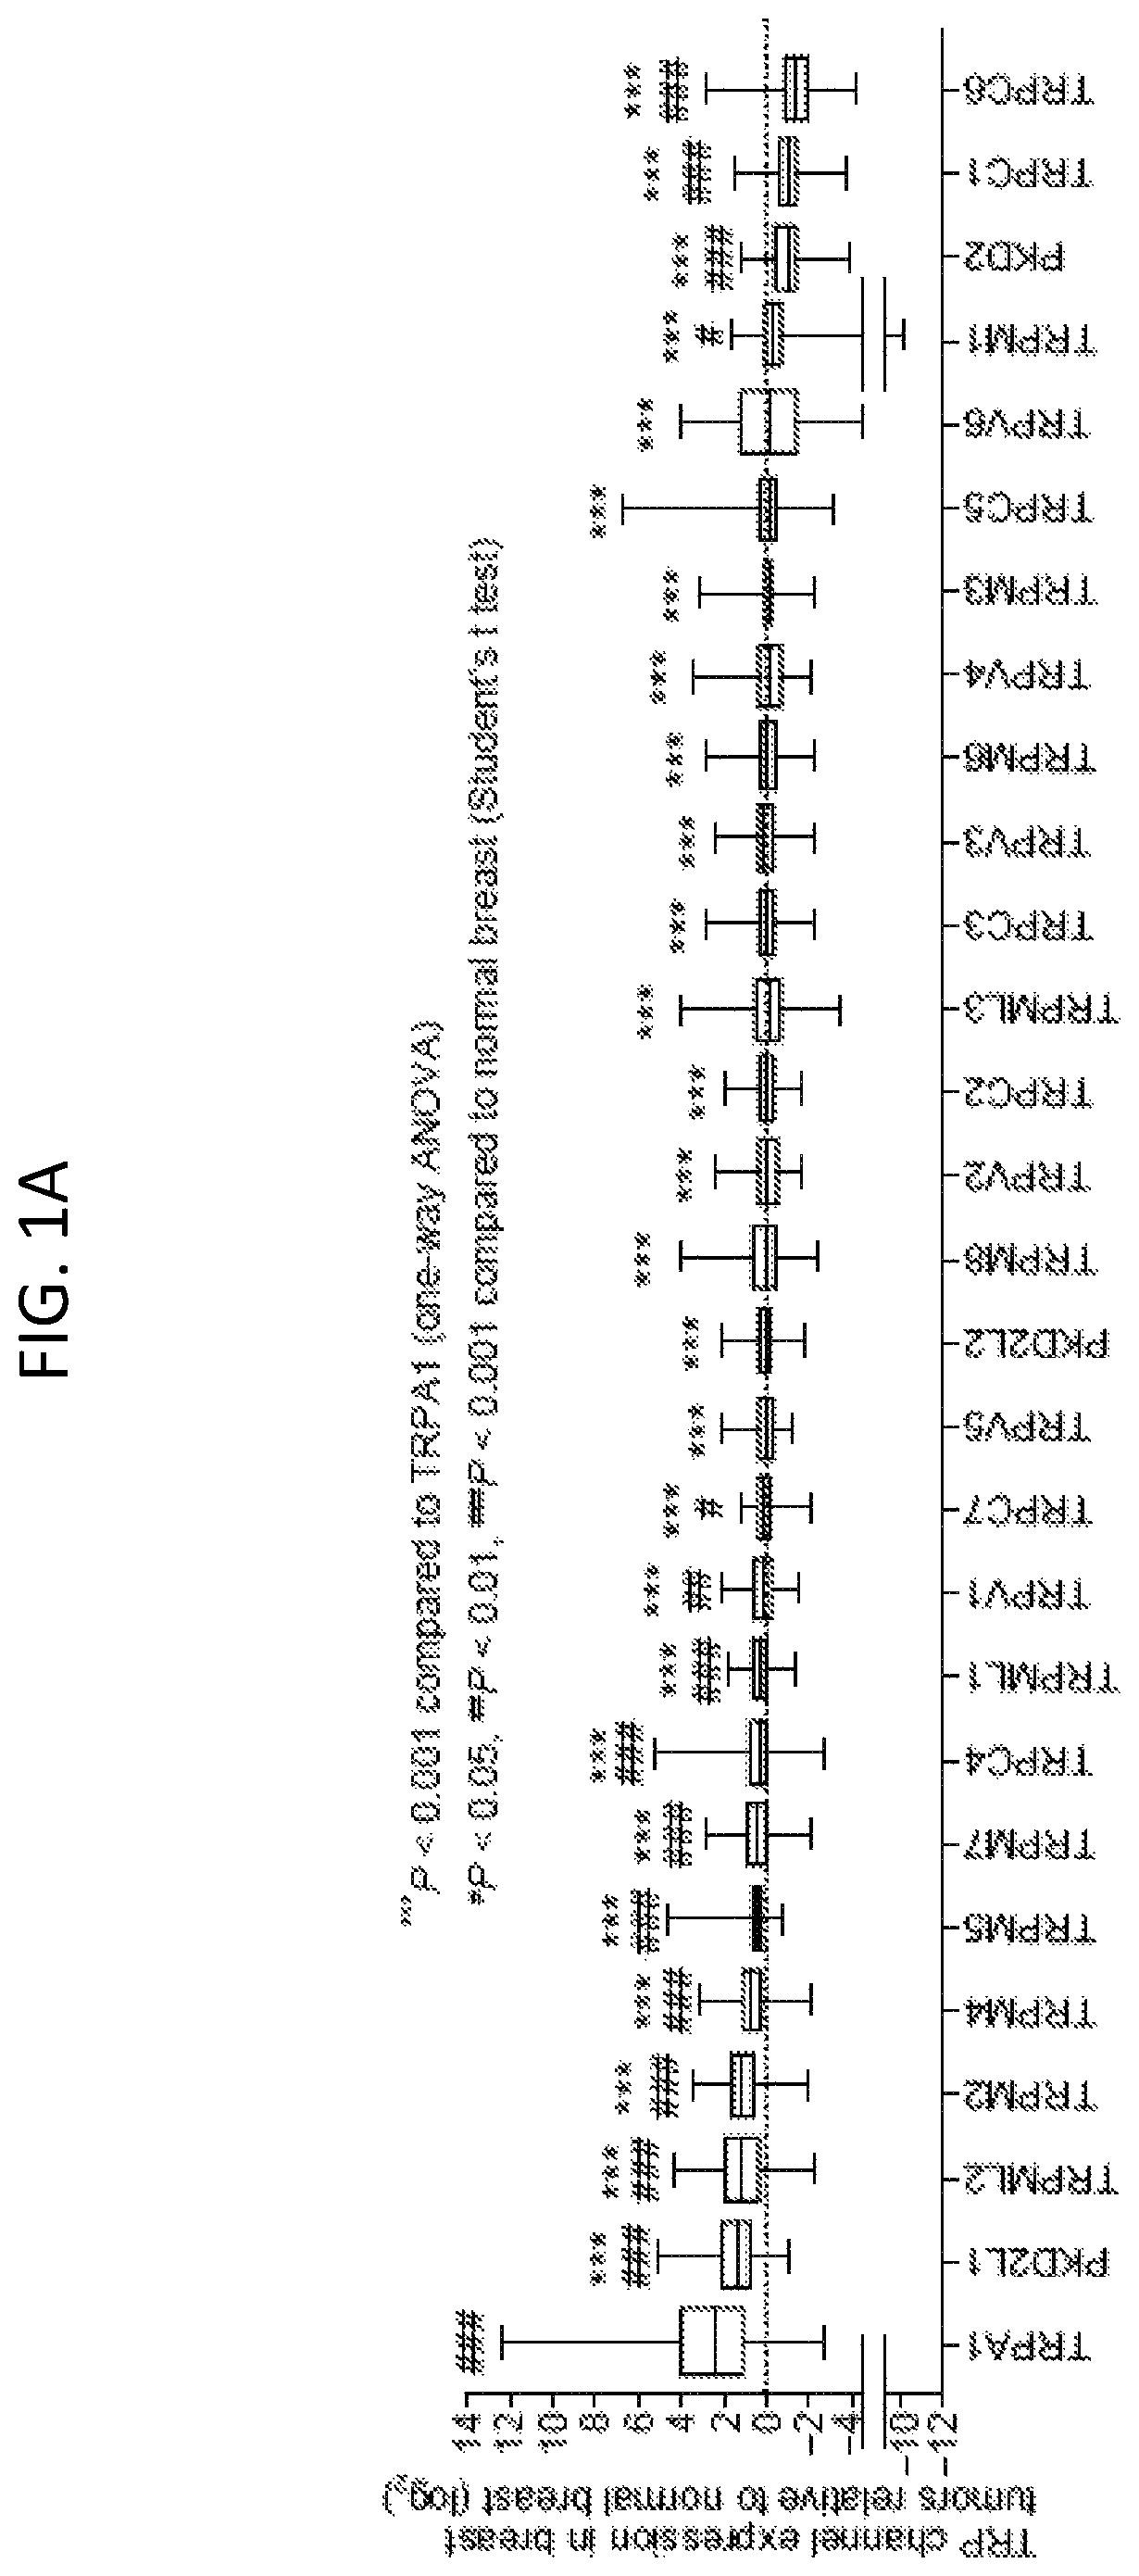 Methods of use for TRP channel antagonist-based combination cancer therapies